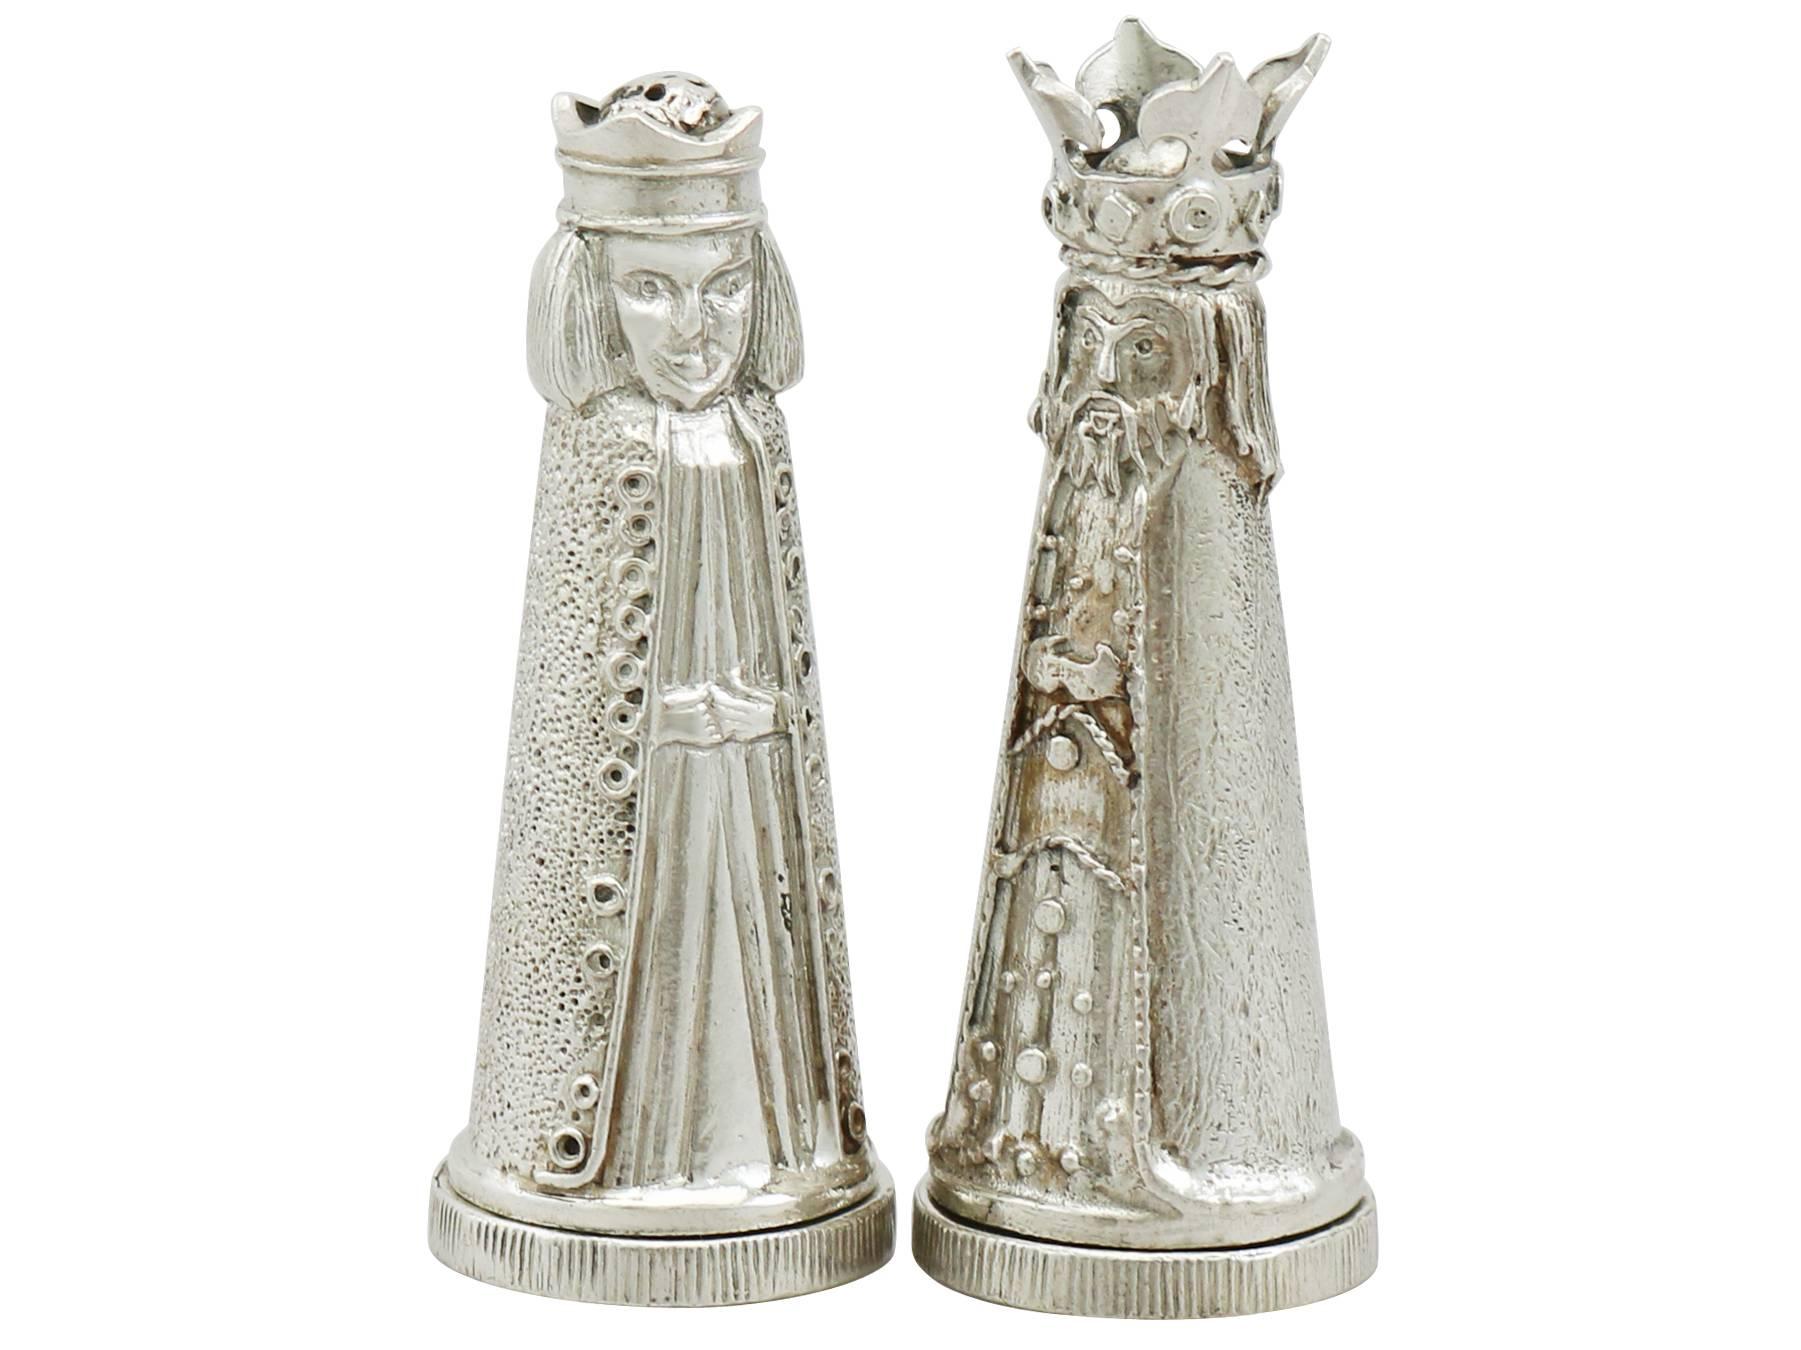 An exceptional, fine and impressive, pair of vintage English cast sterling silver salt and pepper shakers - boxed; an addition to our silver cruets/condiments collection.

These exceptional vintage Elizabeth II cast sterling silver salt and pepper